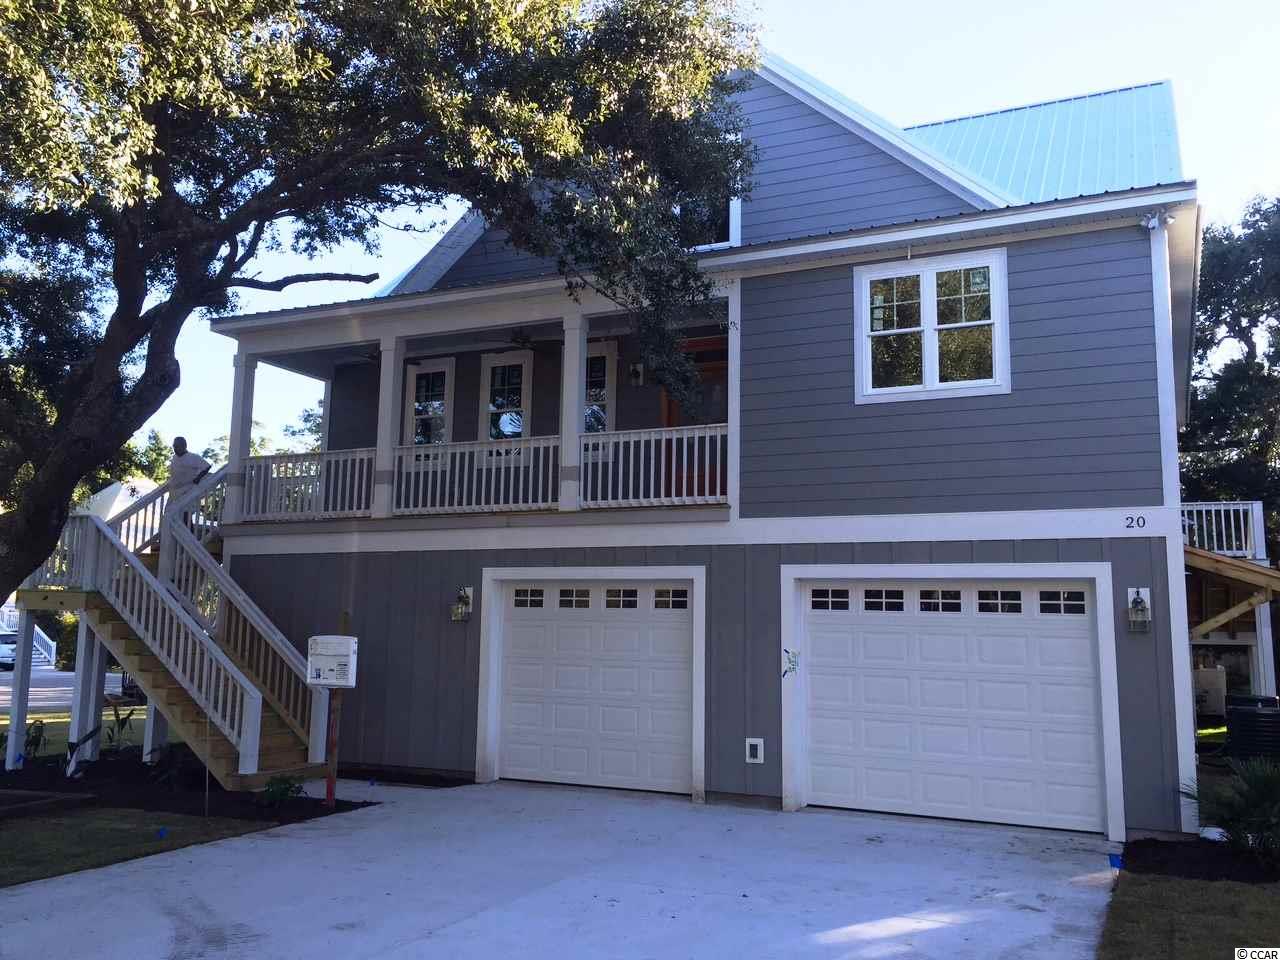 20 Orchard Ave. Murrells Inlet, SC 29576